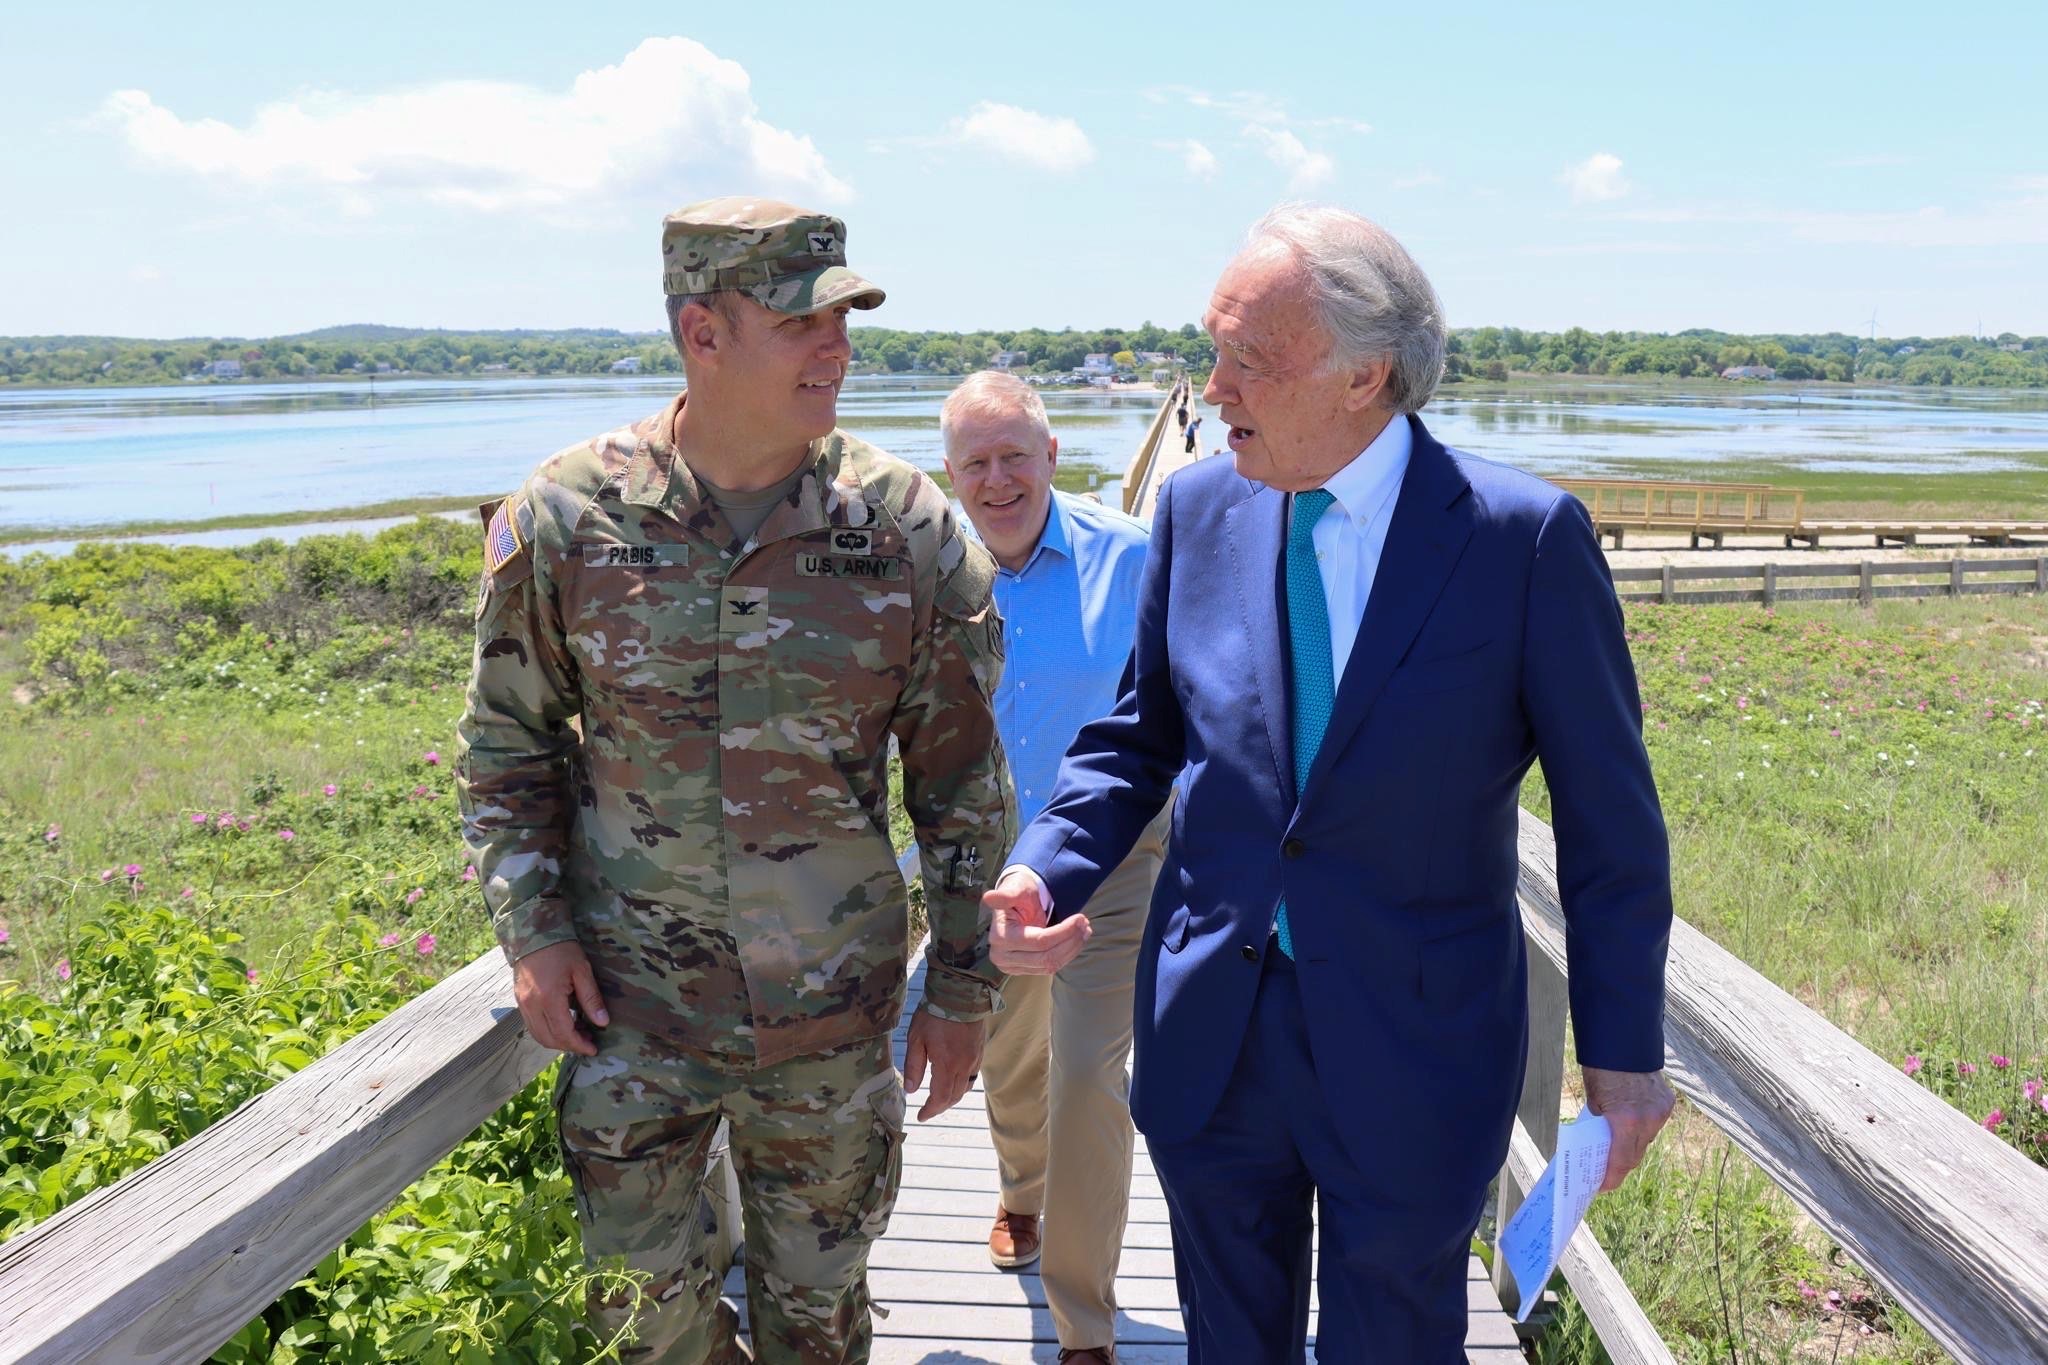 Ed Markey and other officials in Sandwich, MA, discussing beach restoration